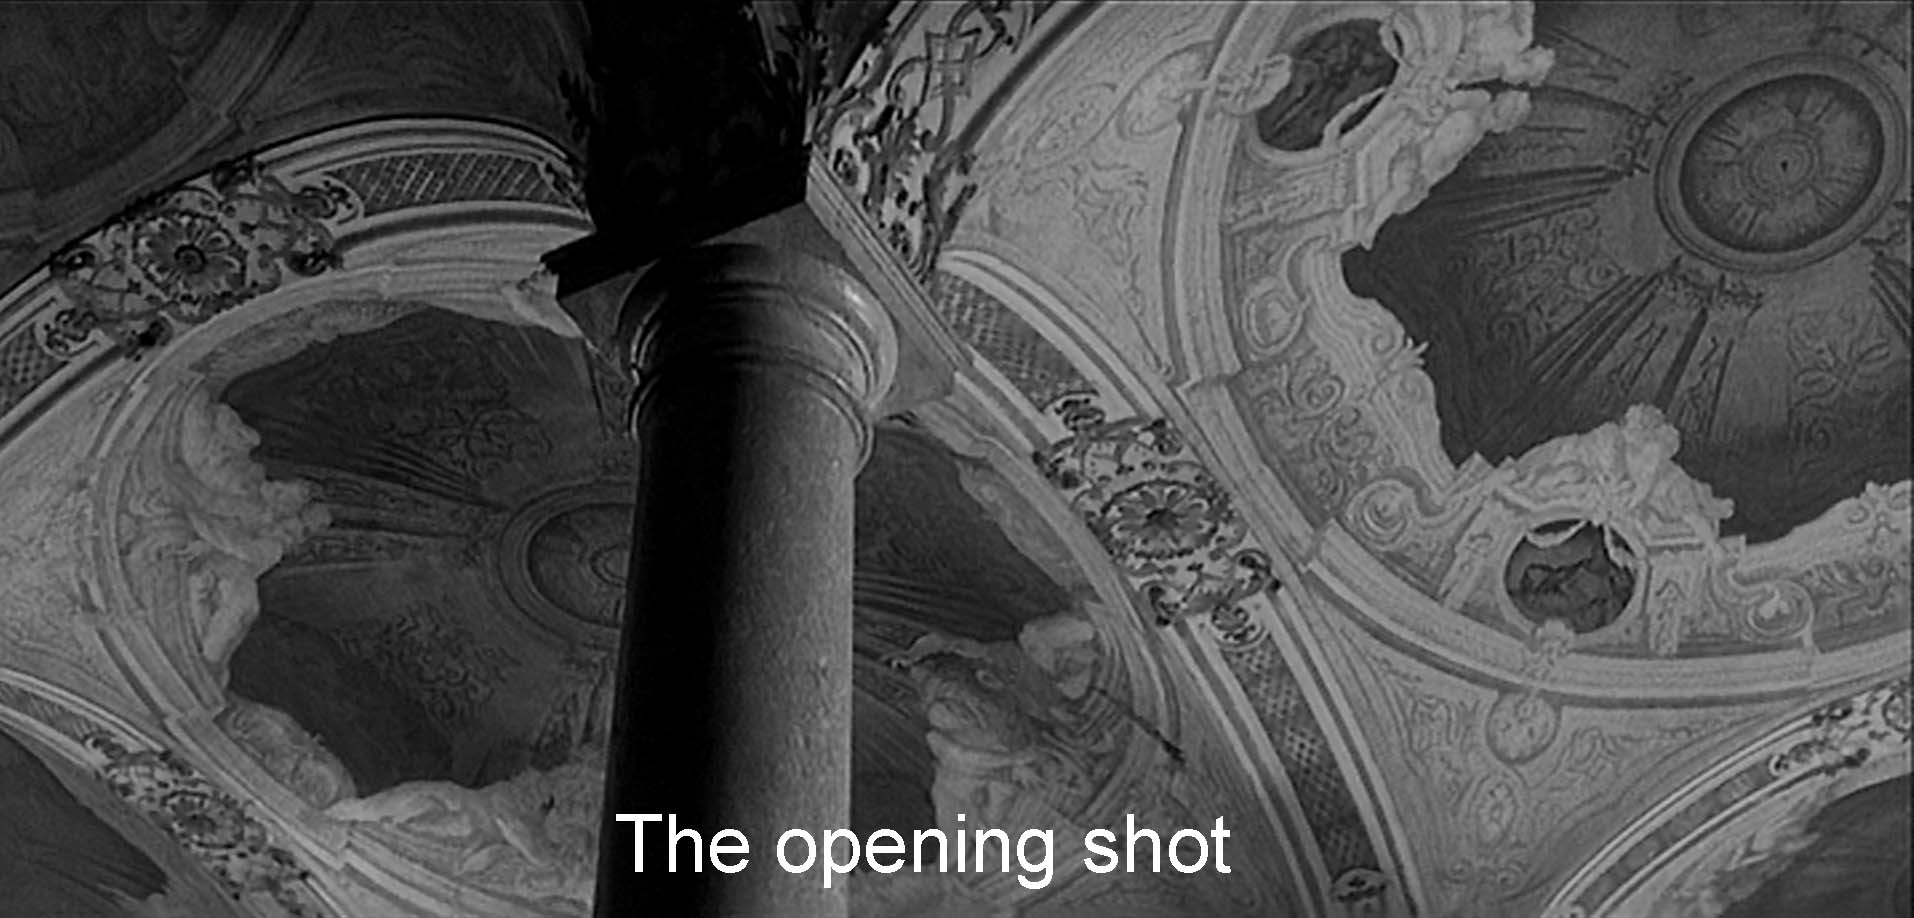 The opening shot